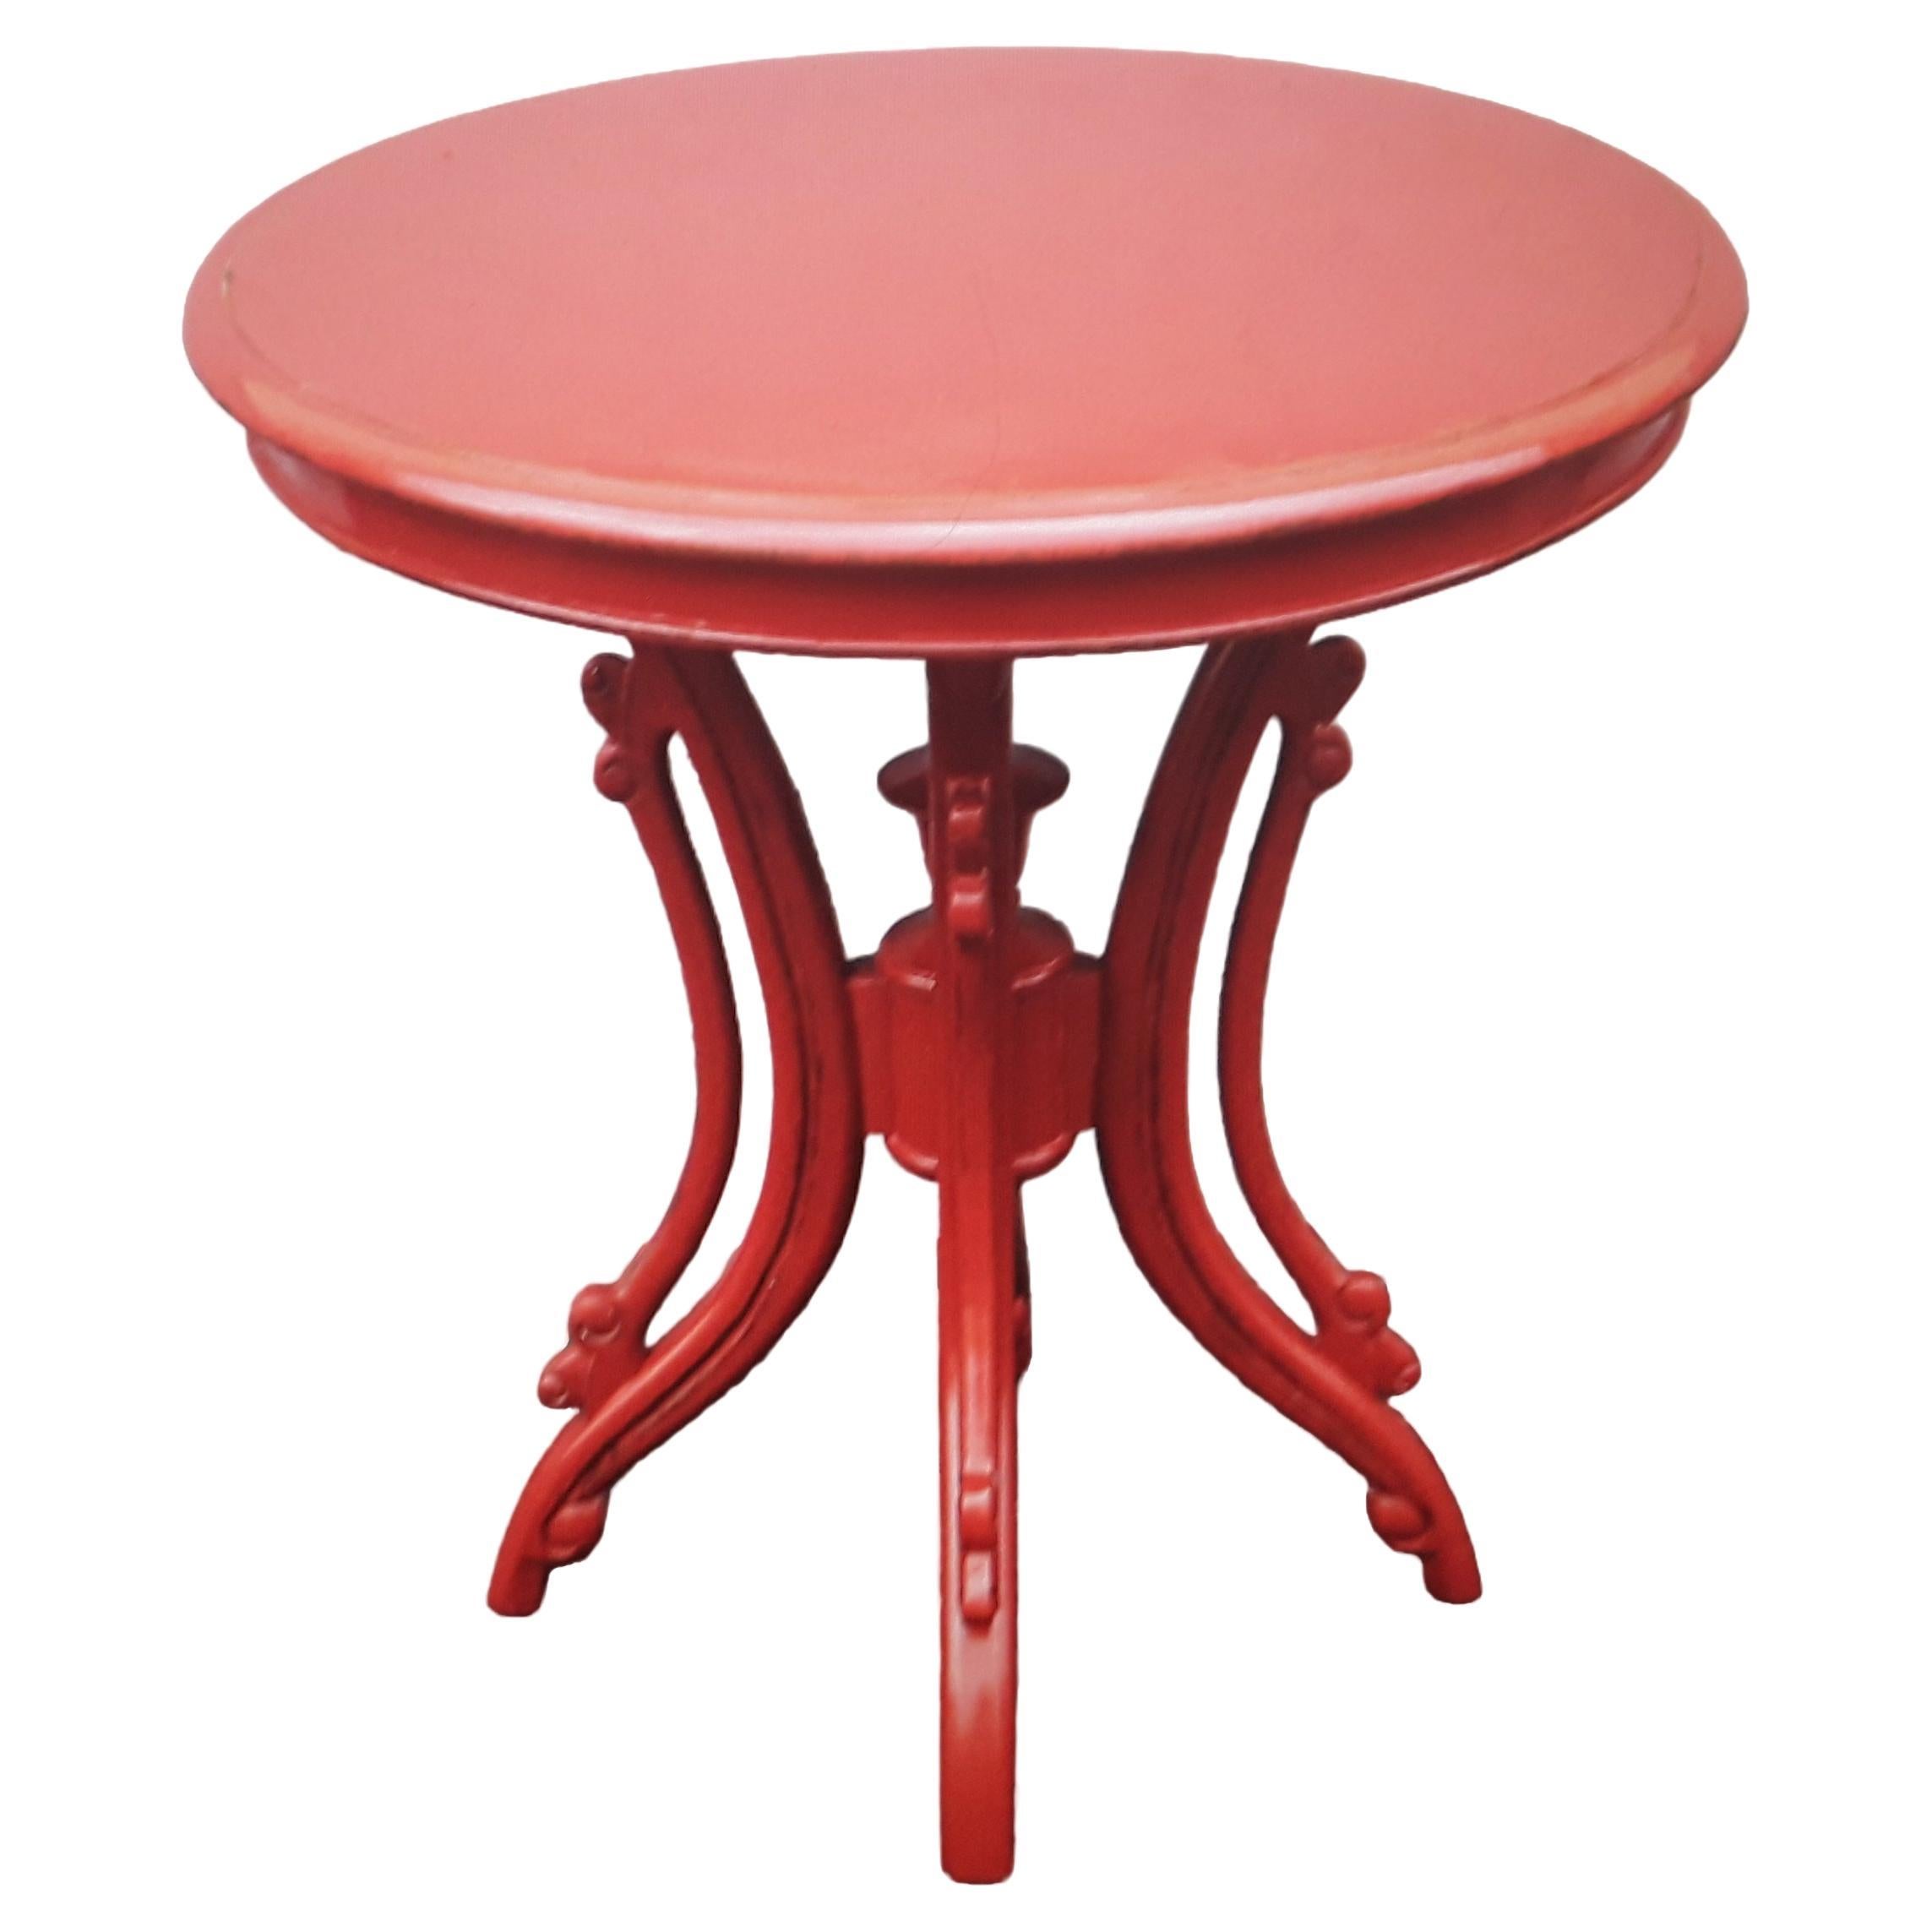 1940's Hollywood Regency Original Red Color Occasional/ Accent/ Side Table For Sale